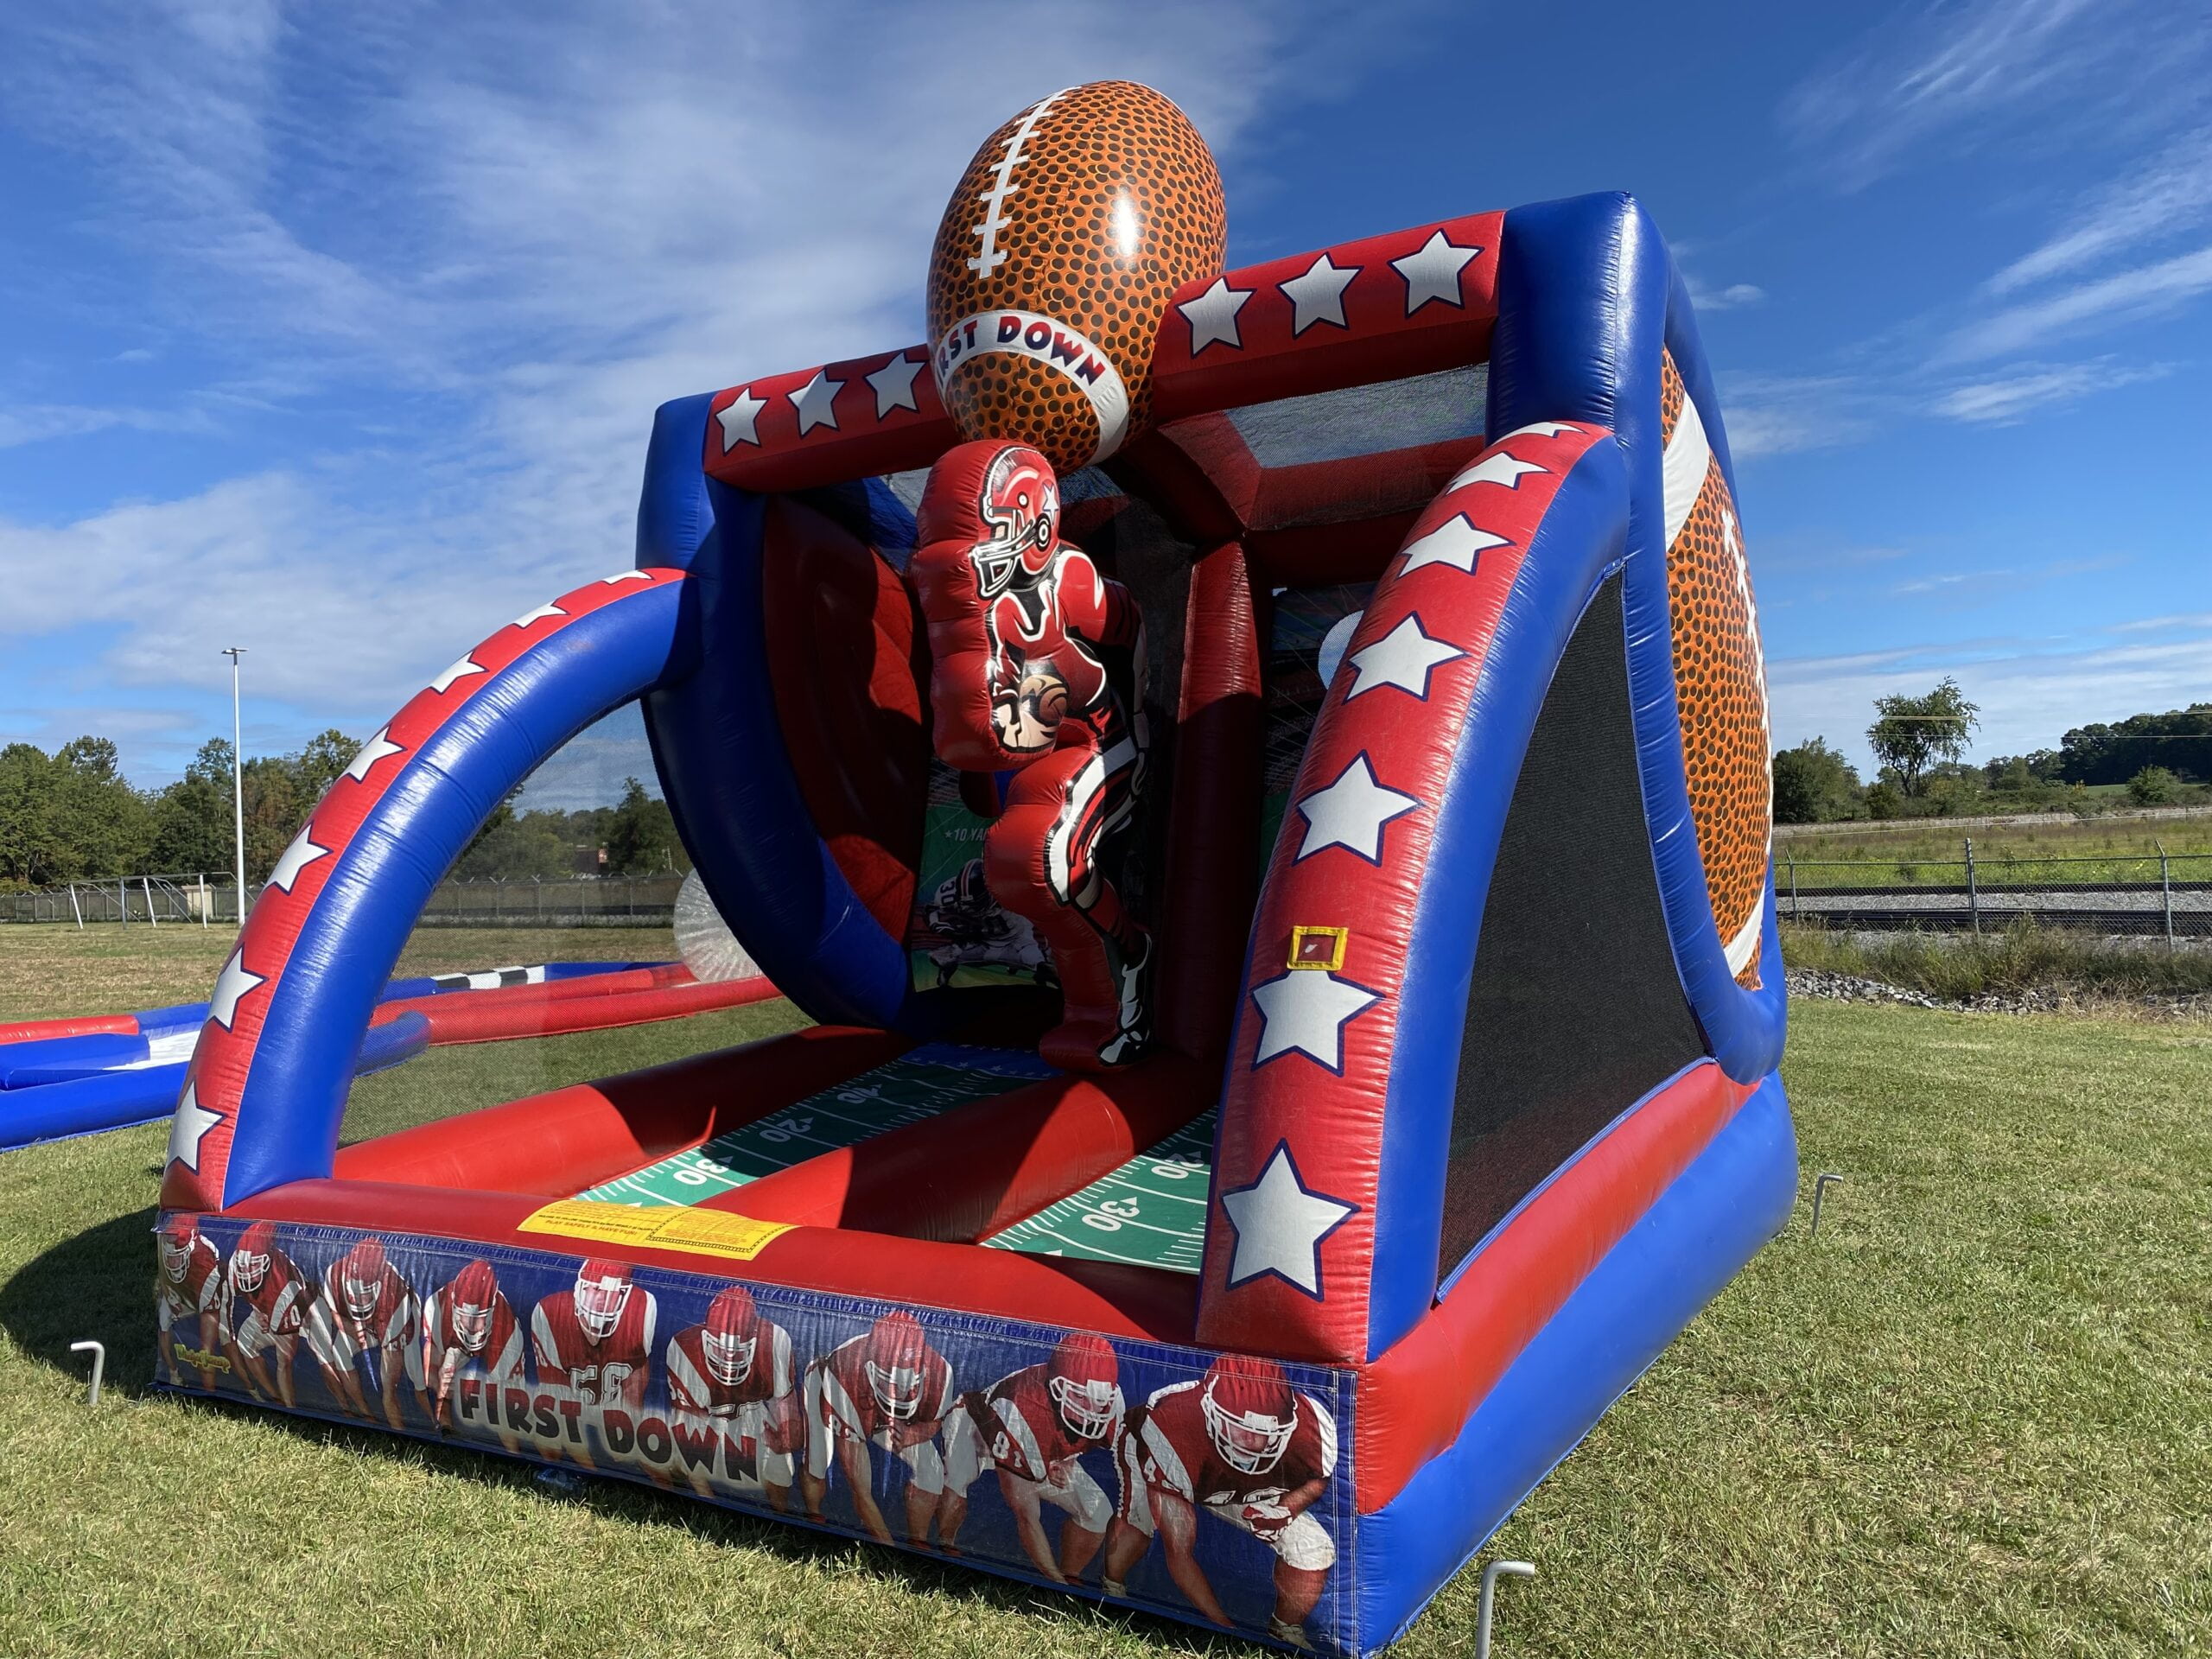 Inflatable football-themed game rental at an outdoor event, with a large football on top.